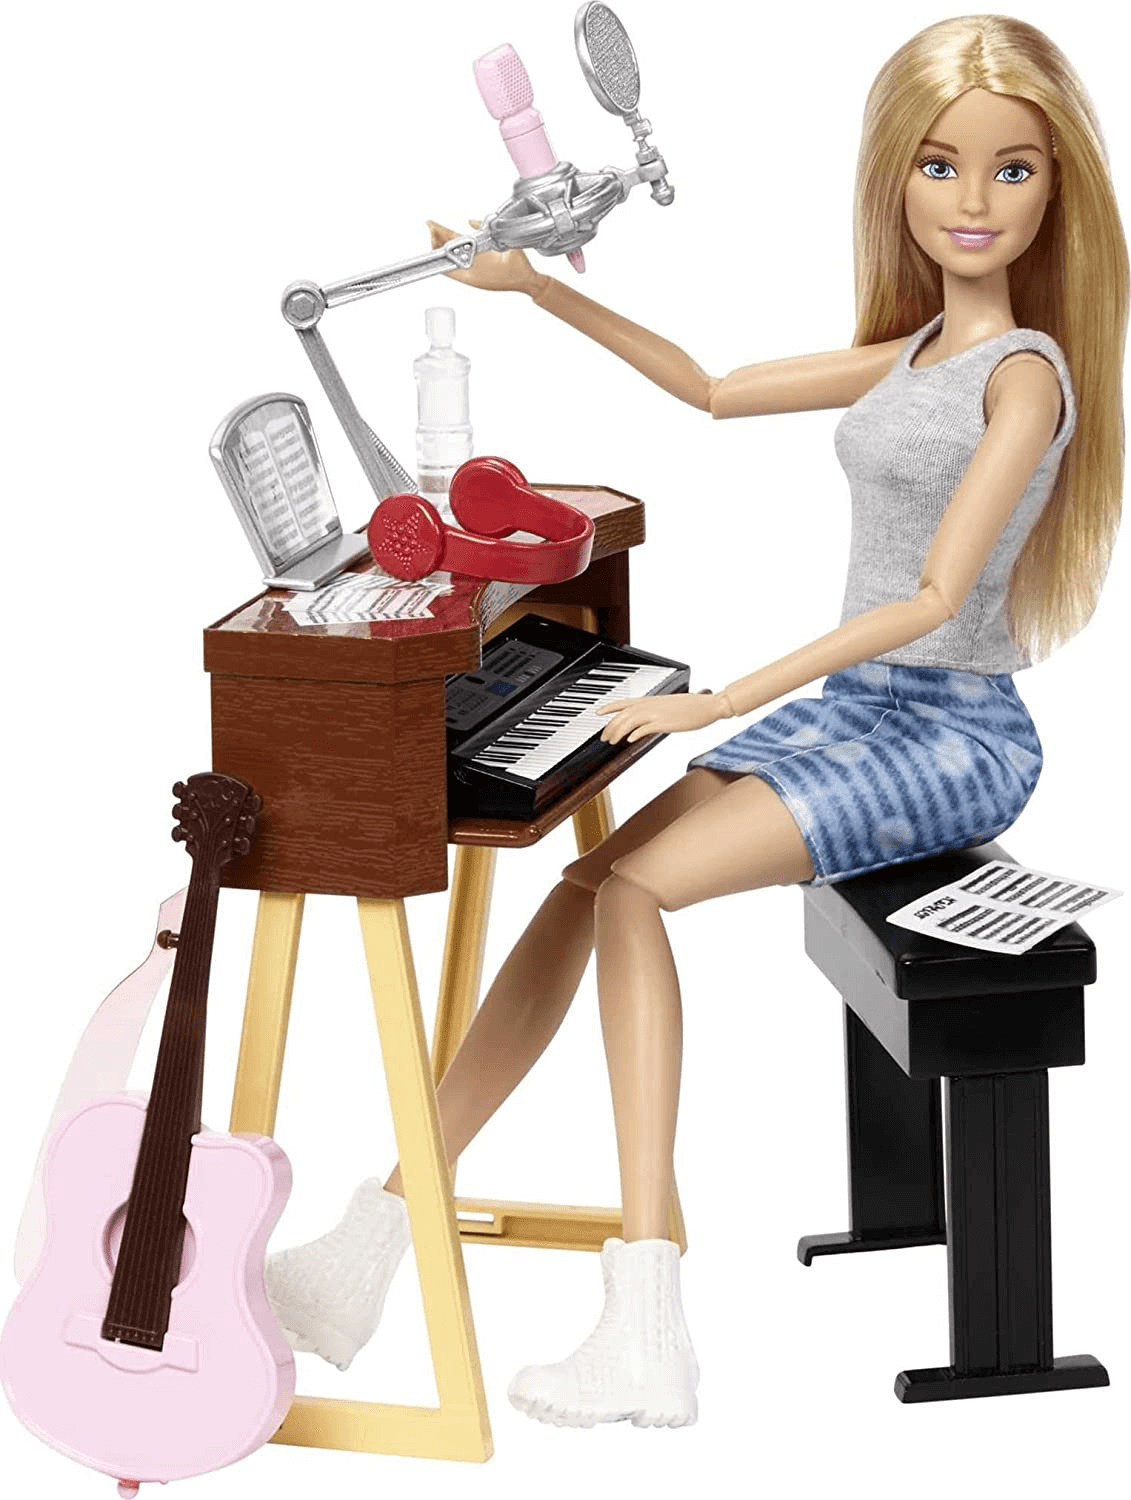 Barbie Musician Doll with Musical Instruments!